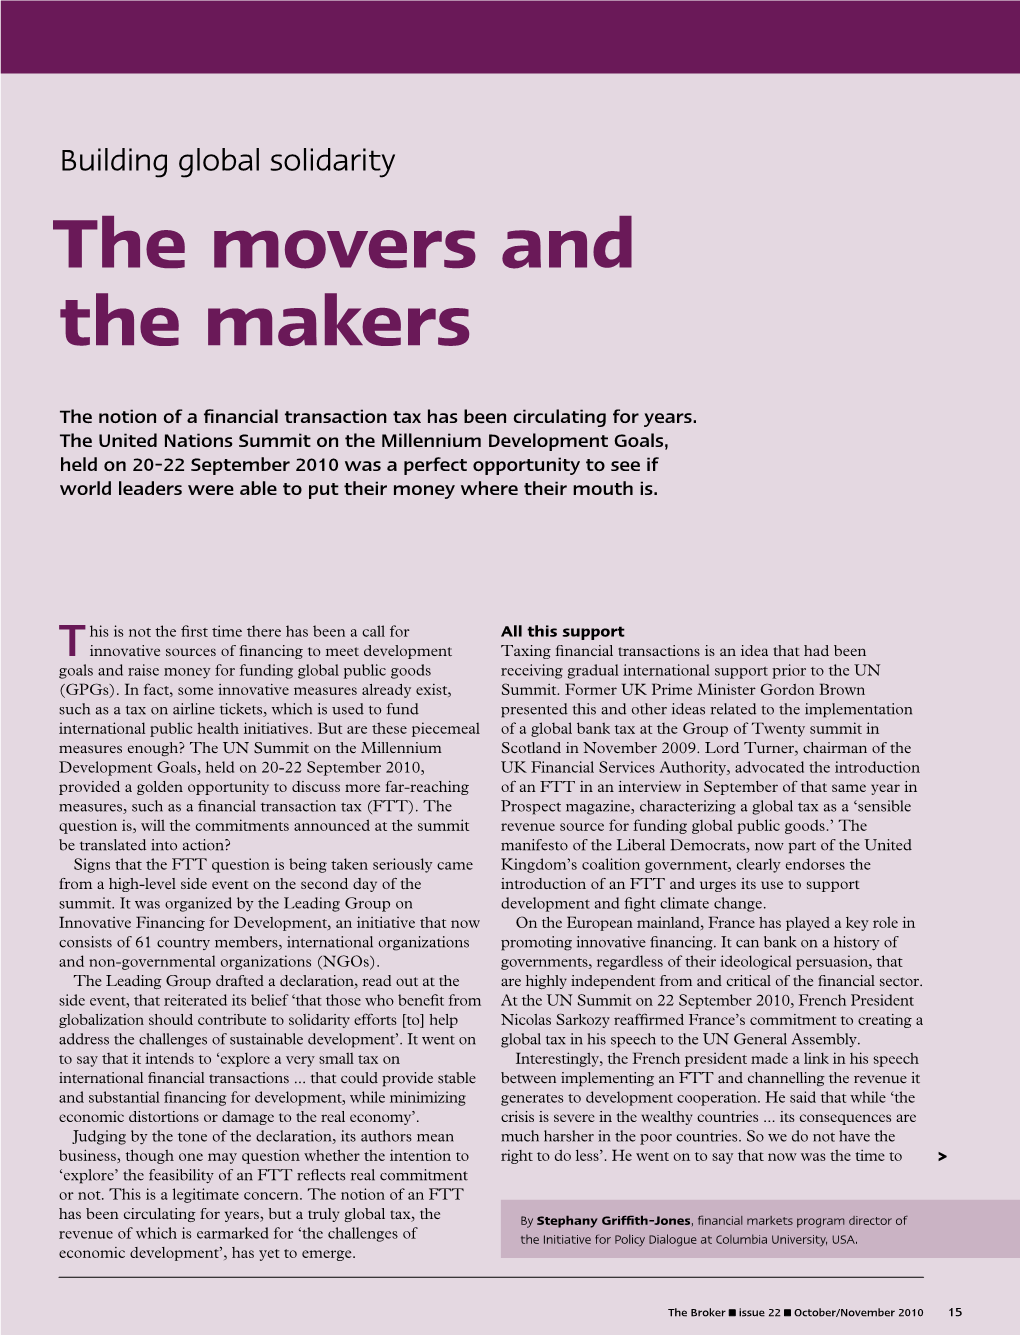 The Movers and the Makers